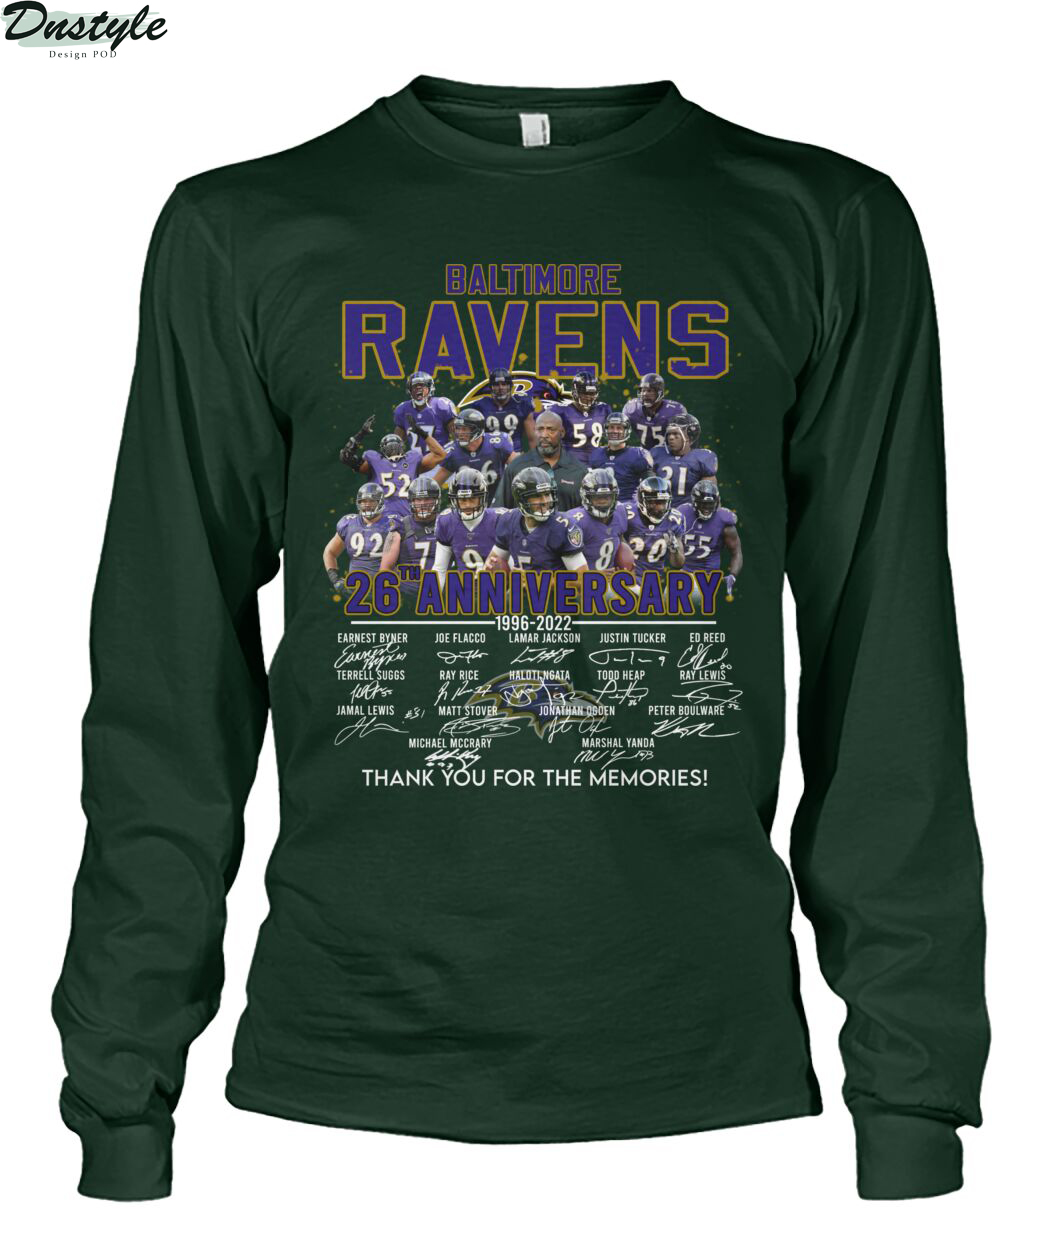 Baltimore ravens 26th anniversary thank you for the memories shirt